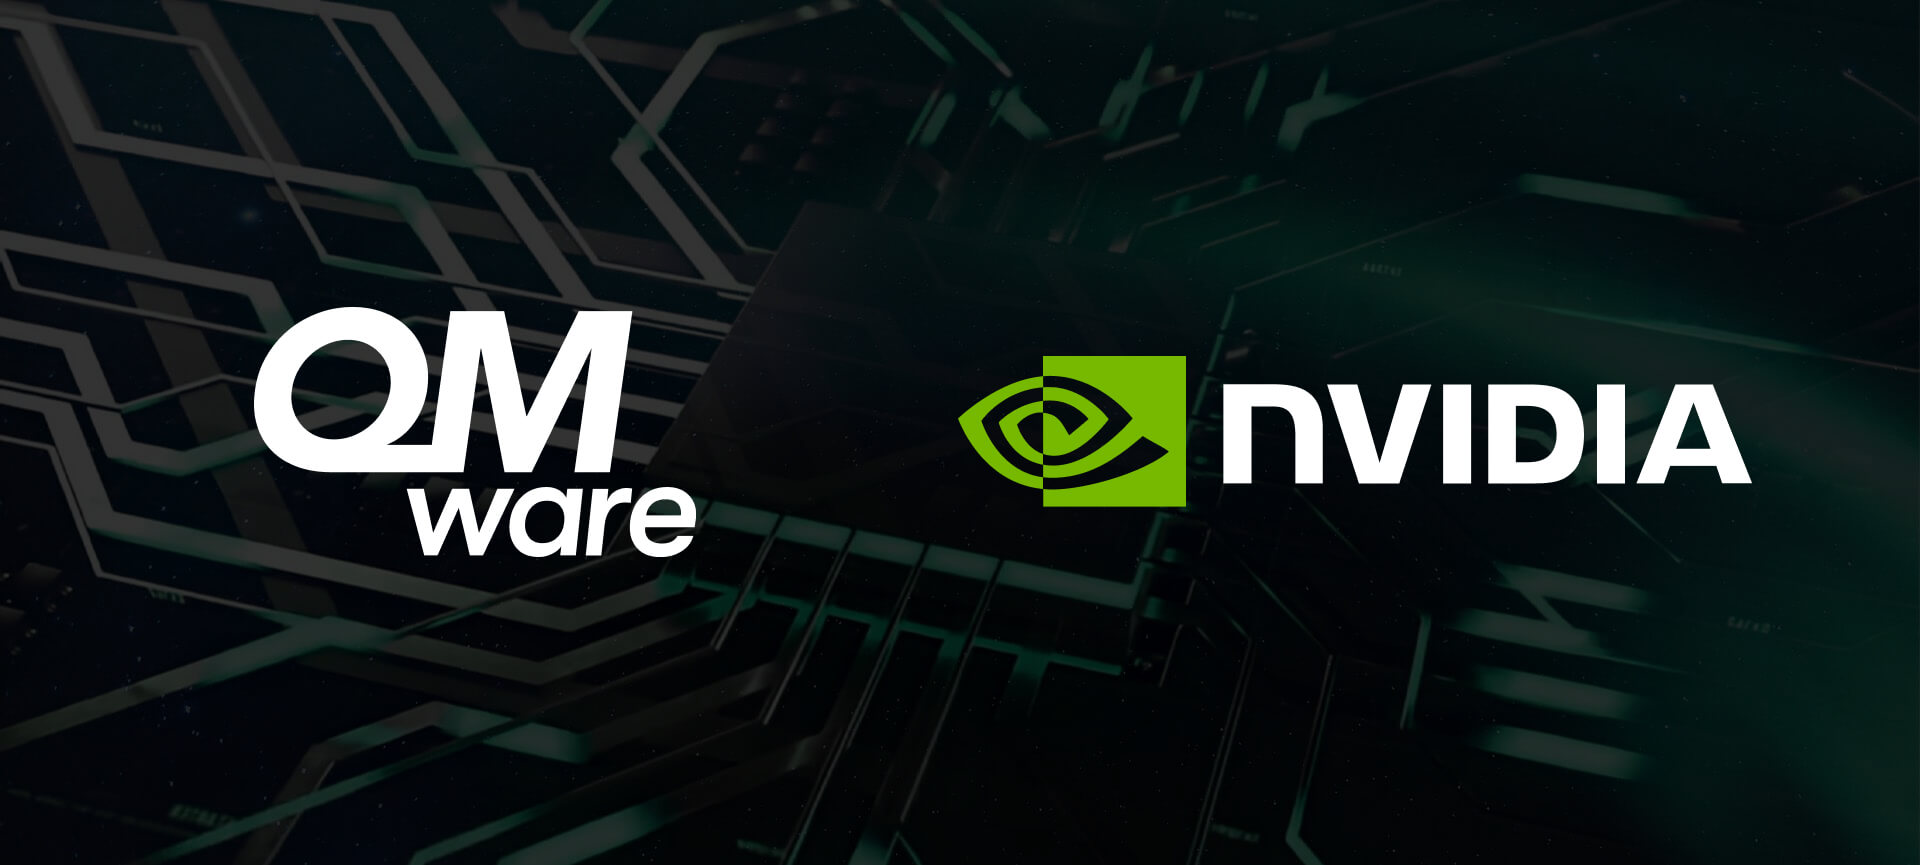 QMware and NVIDIA collaborate to bring quantum-classical computing capabilities to market